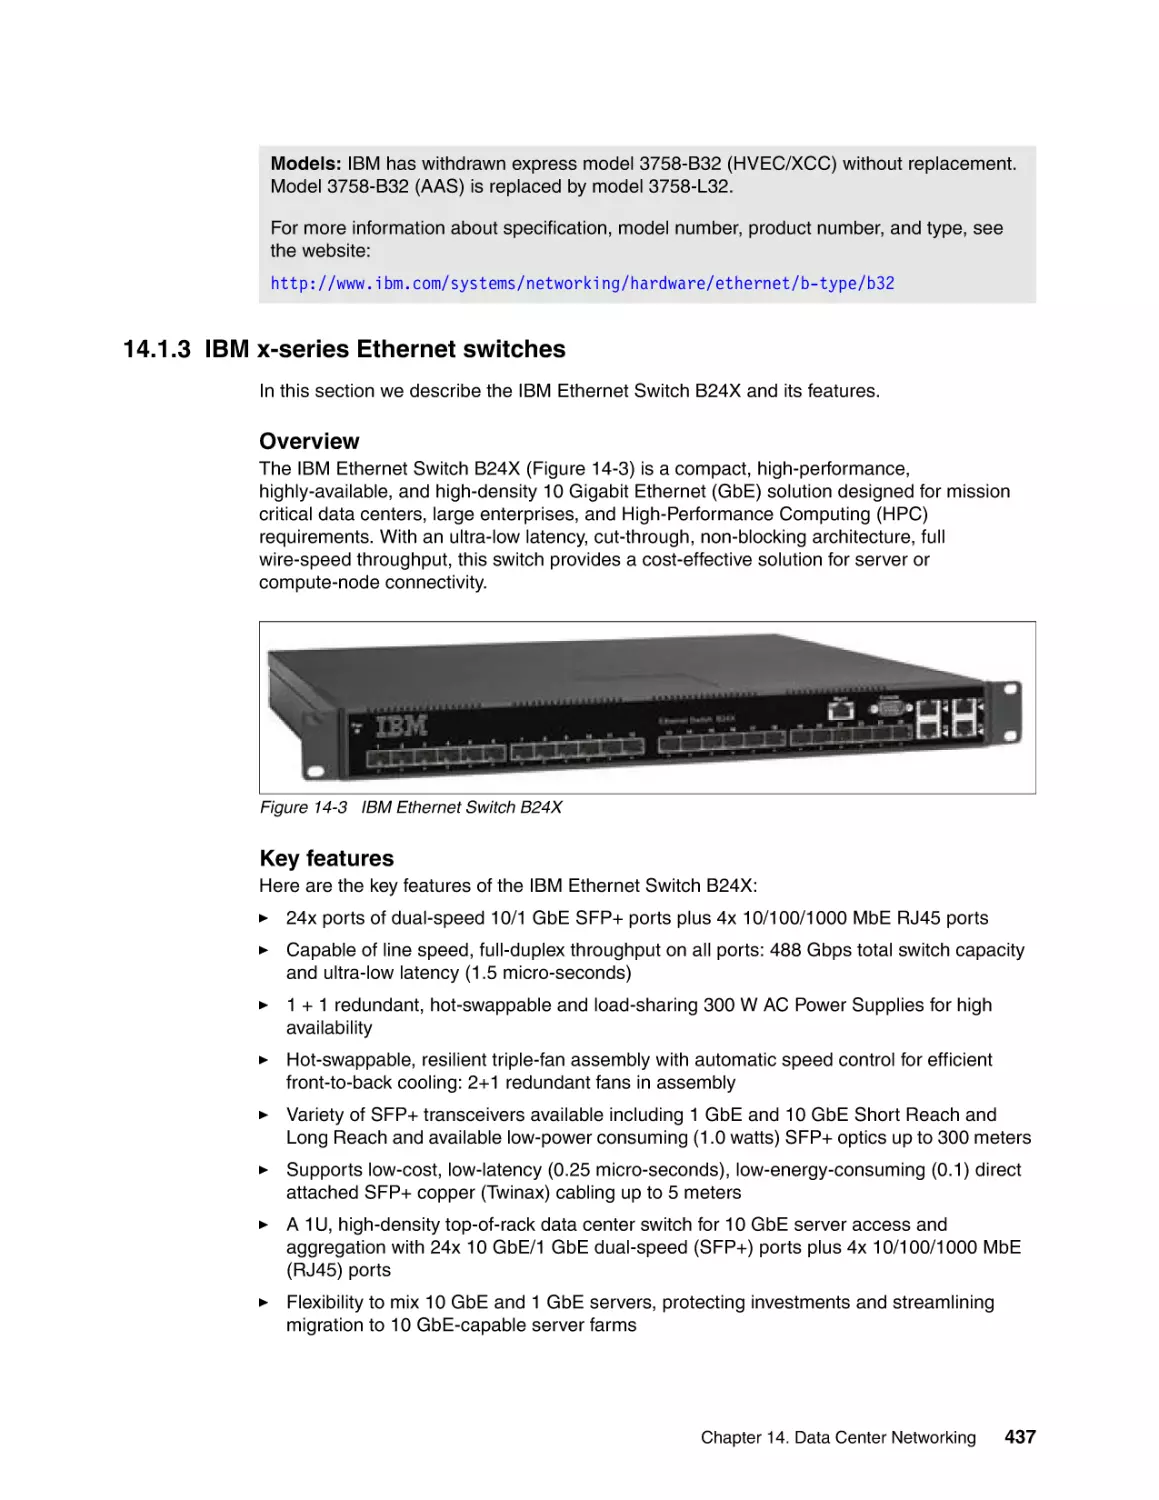 14.1.3 IBM x-series Ethernet switches